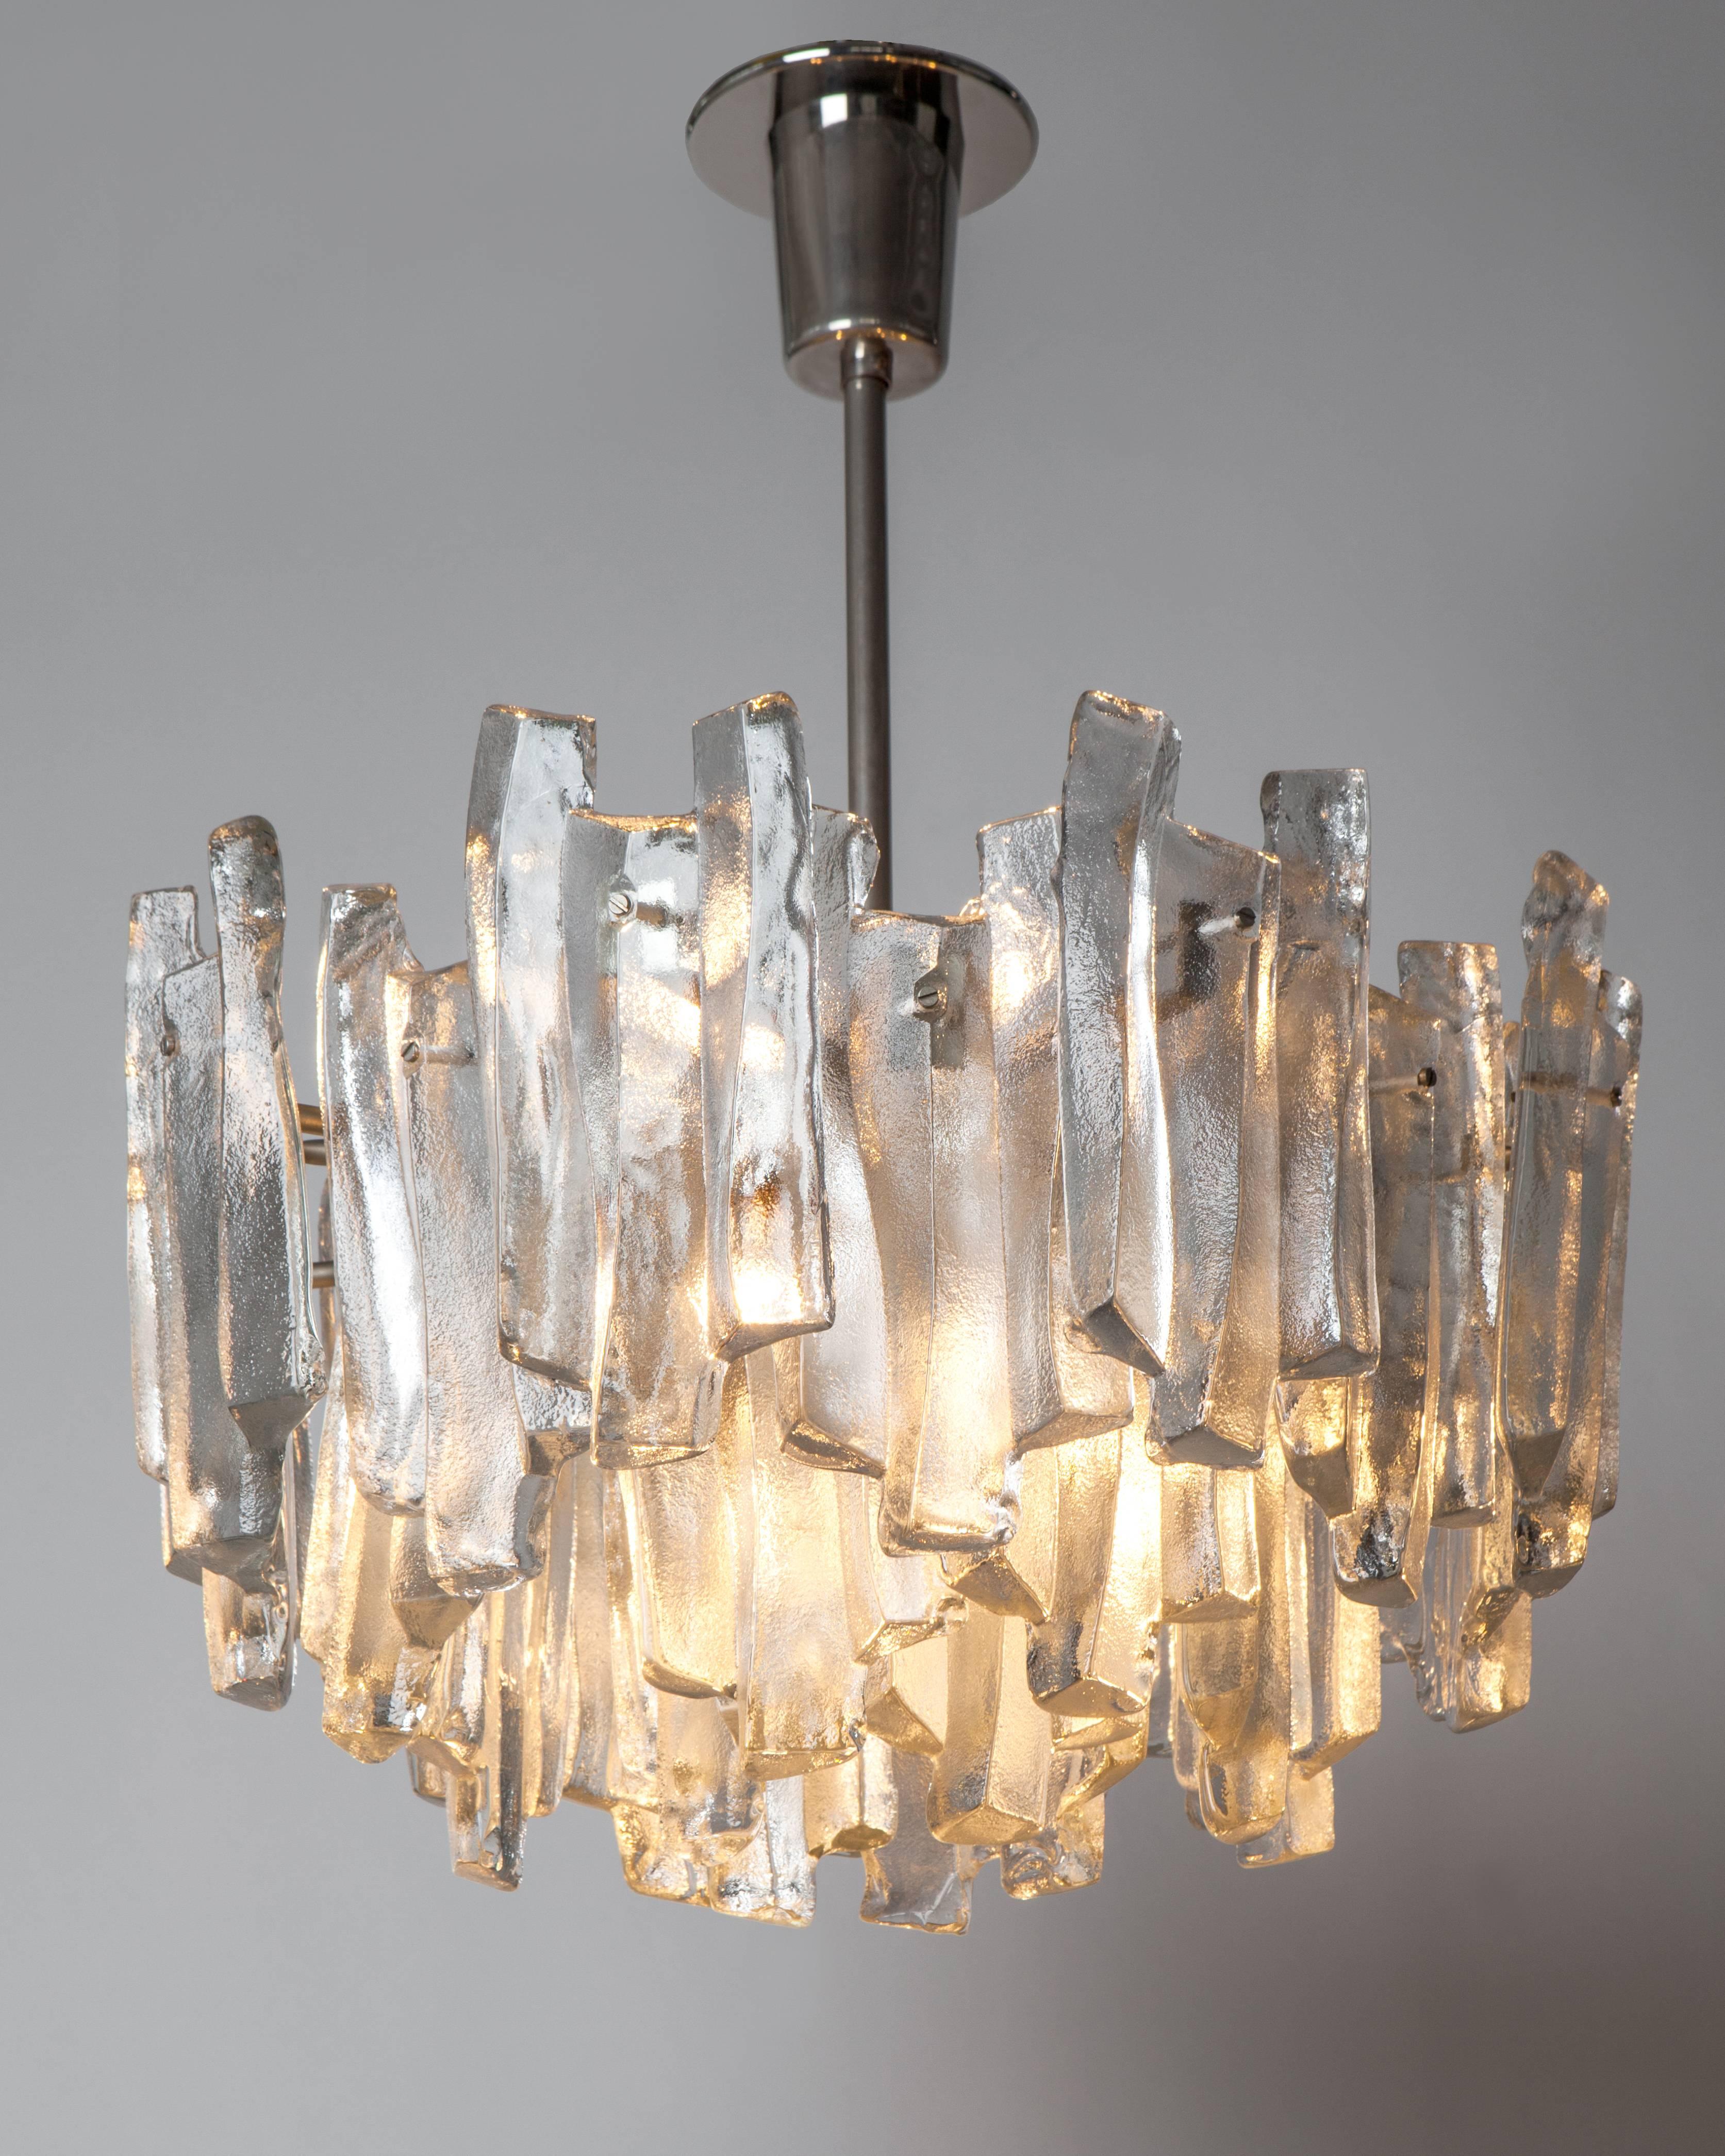 AHL3996
A vintage mid century modern chandelier with ice style glass prisms on old nickel metalwork by the Austrian maker Kalmar. Due to the antique nature of this fixture, there may be some nicks or imperfections in the